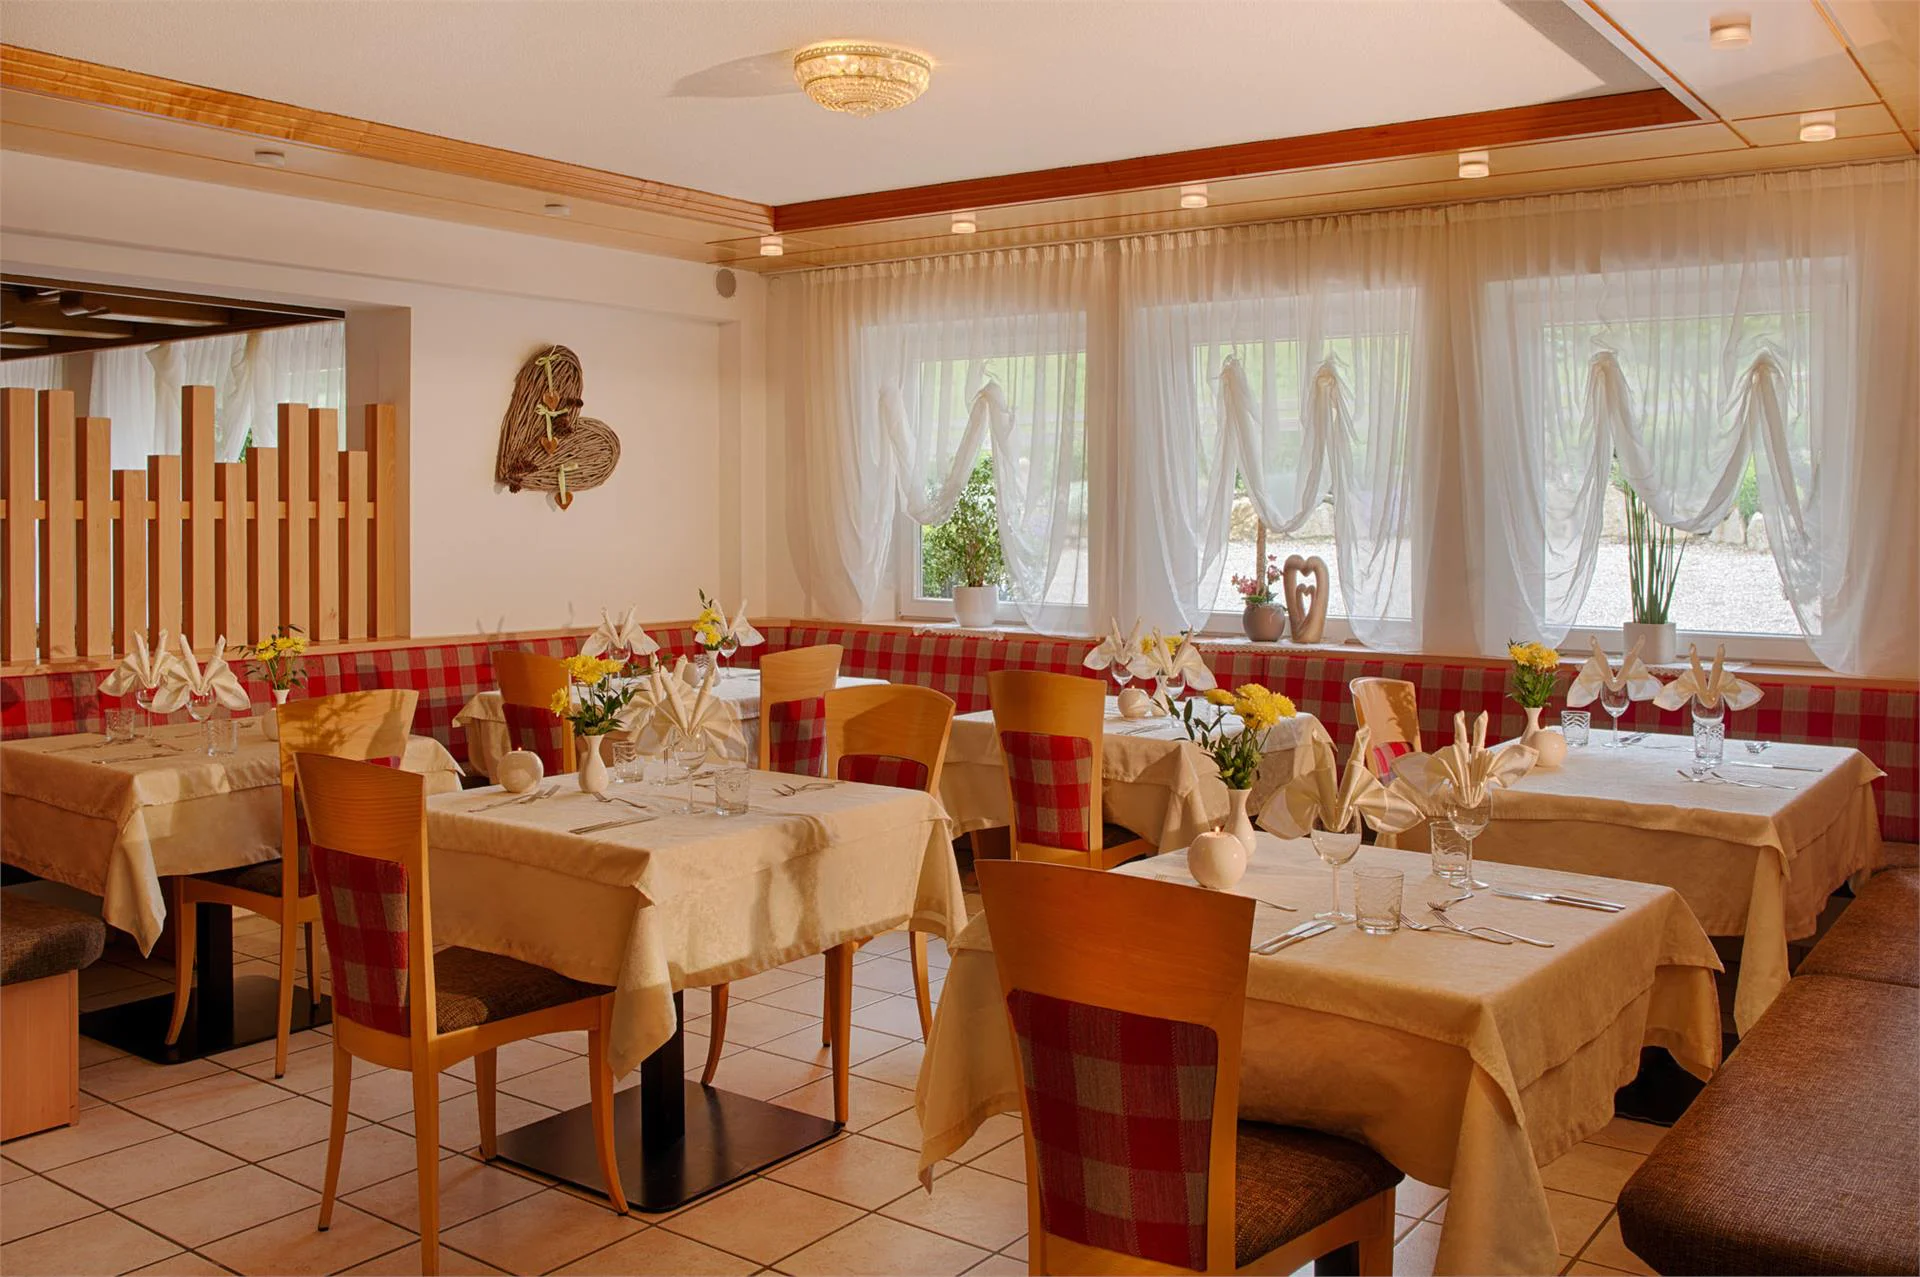 Hotel Mair Sand in Taufers/Campo Tures 9 suedtirol.info